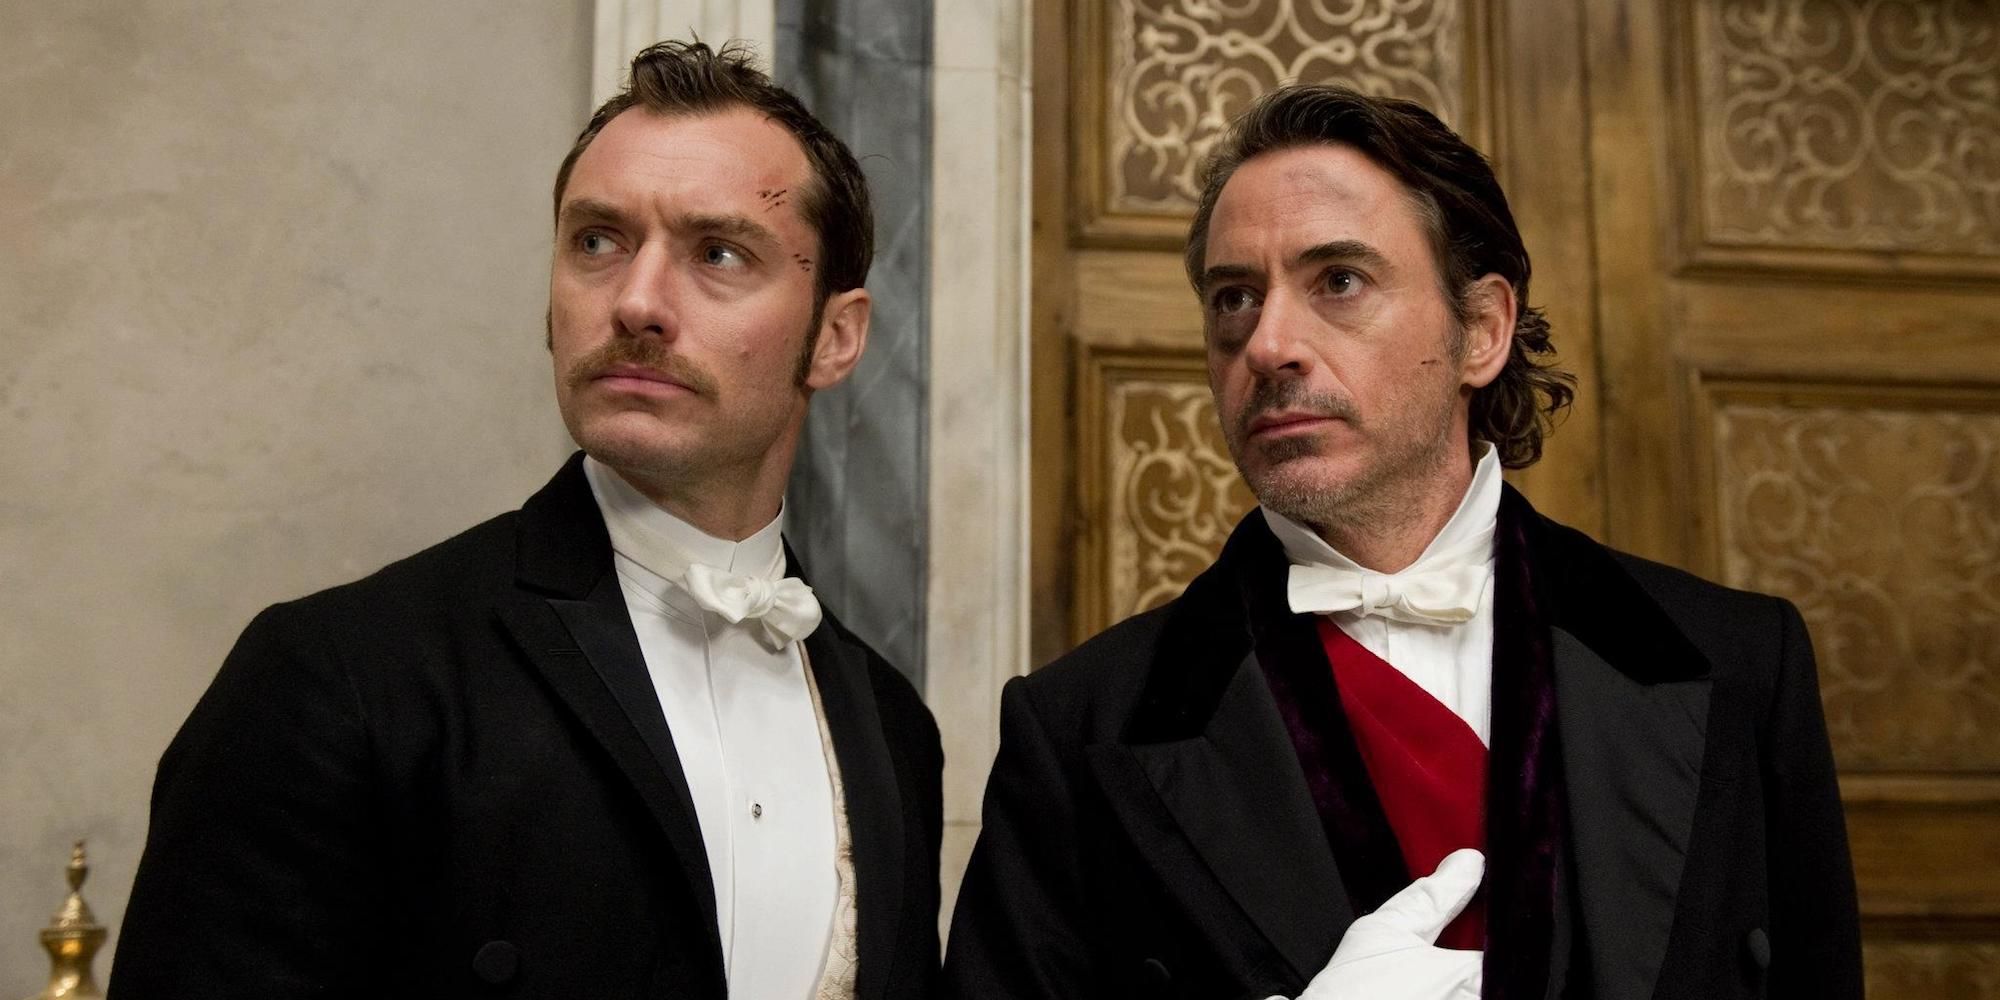 Holmes and Watson dressed in tuxedos in A Game Of Shadows